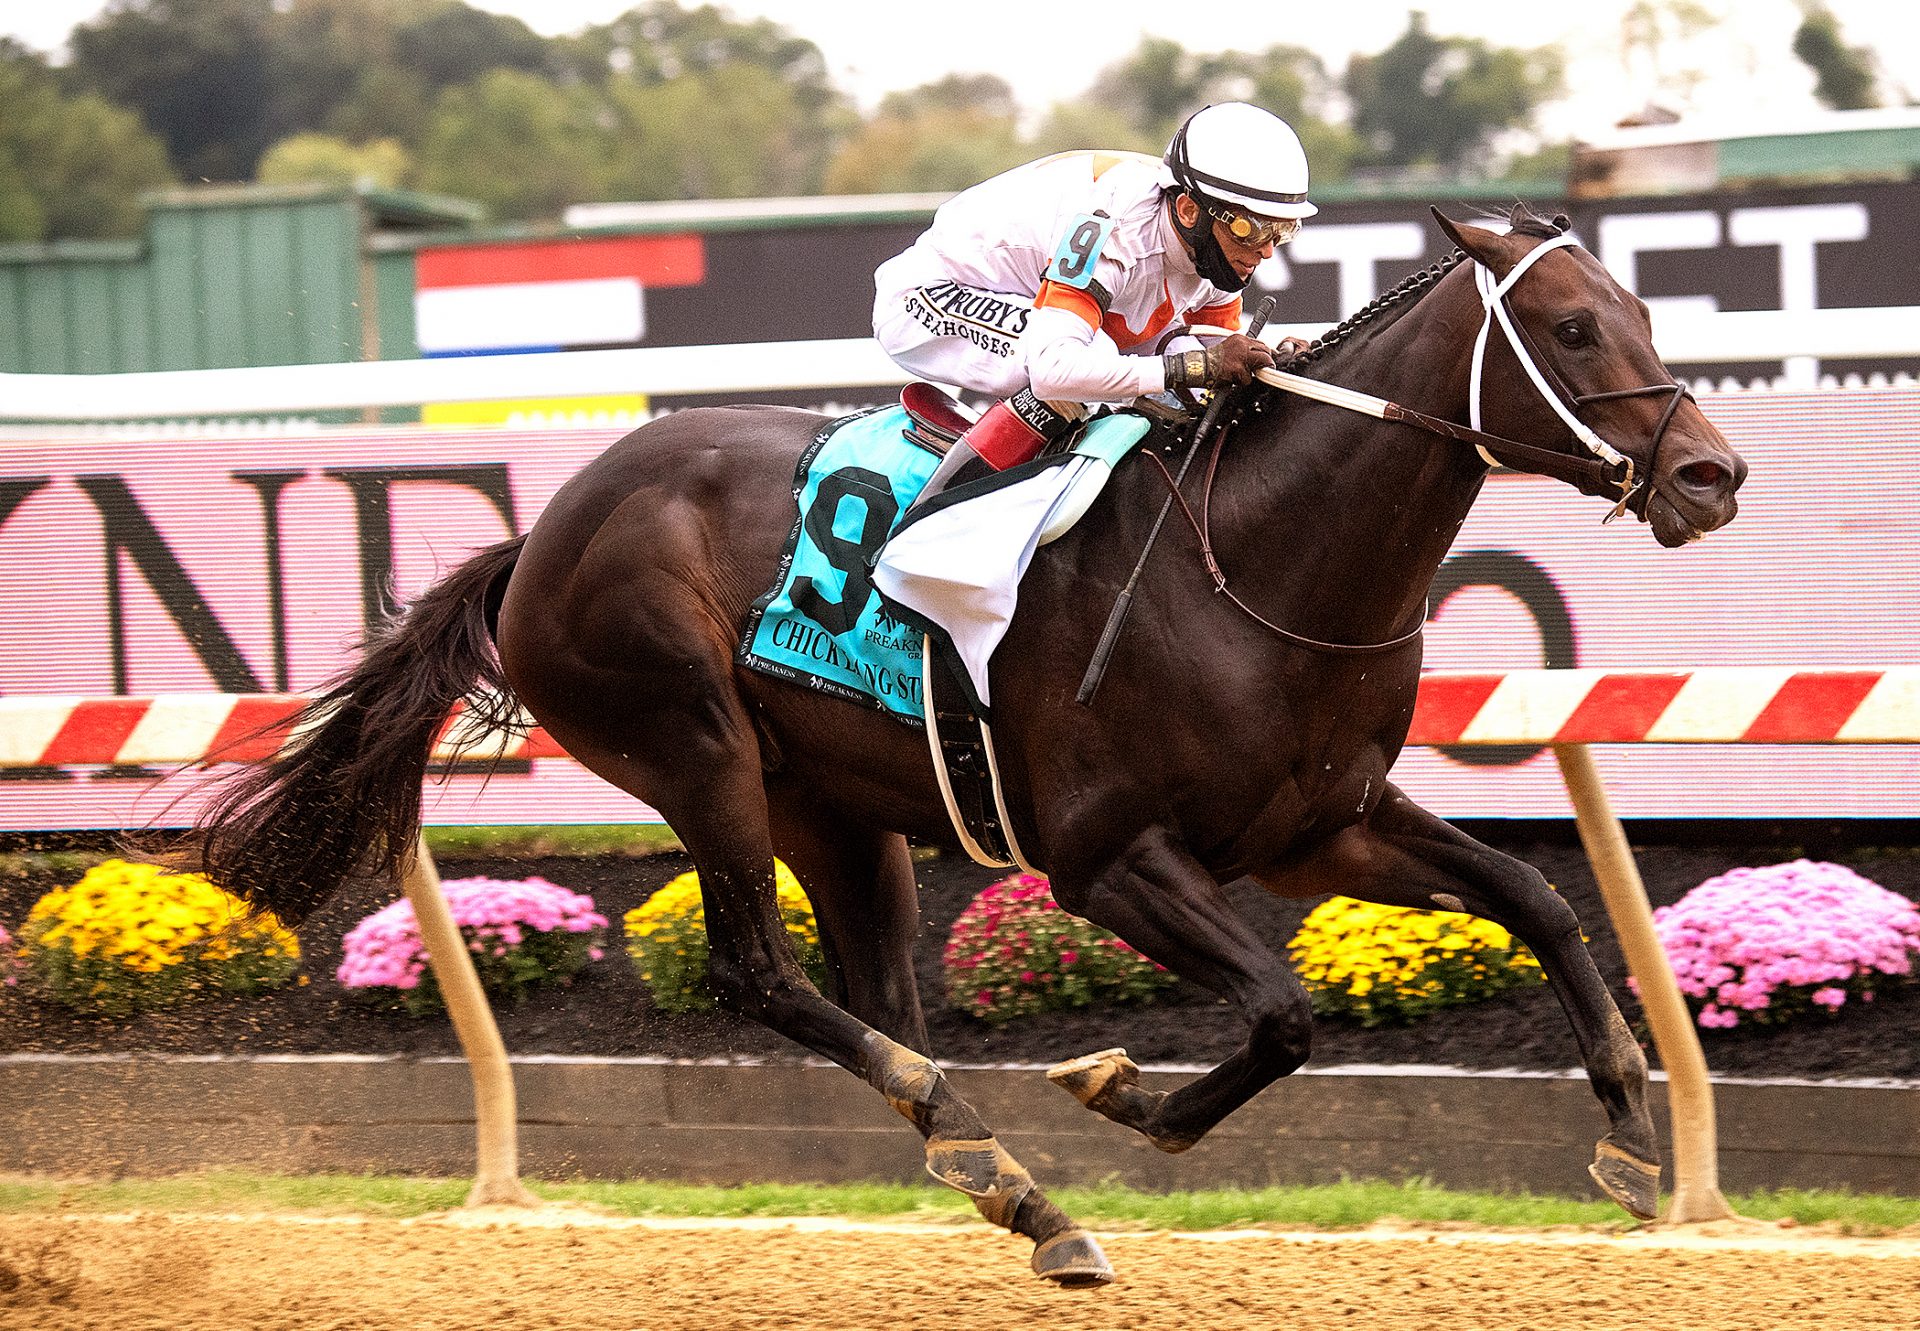 Yaupon (Uncle Mo) Wins Gr.3 Chick Lang Stakes at Pimlico